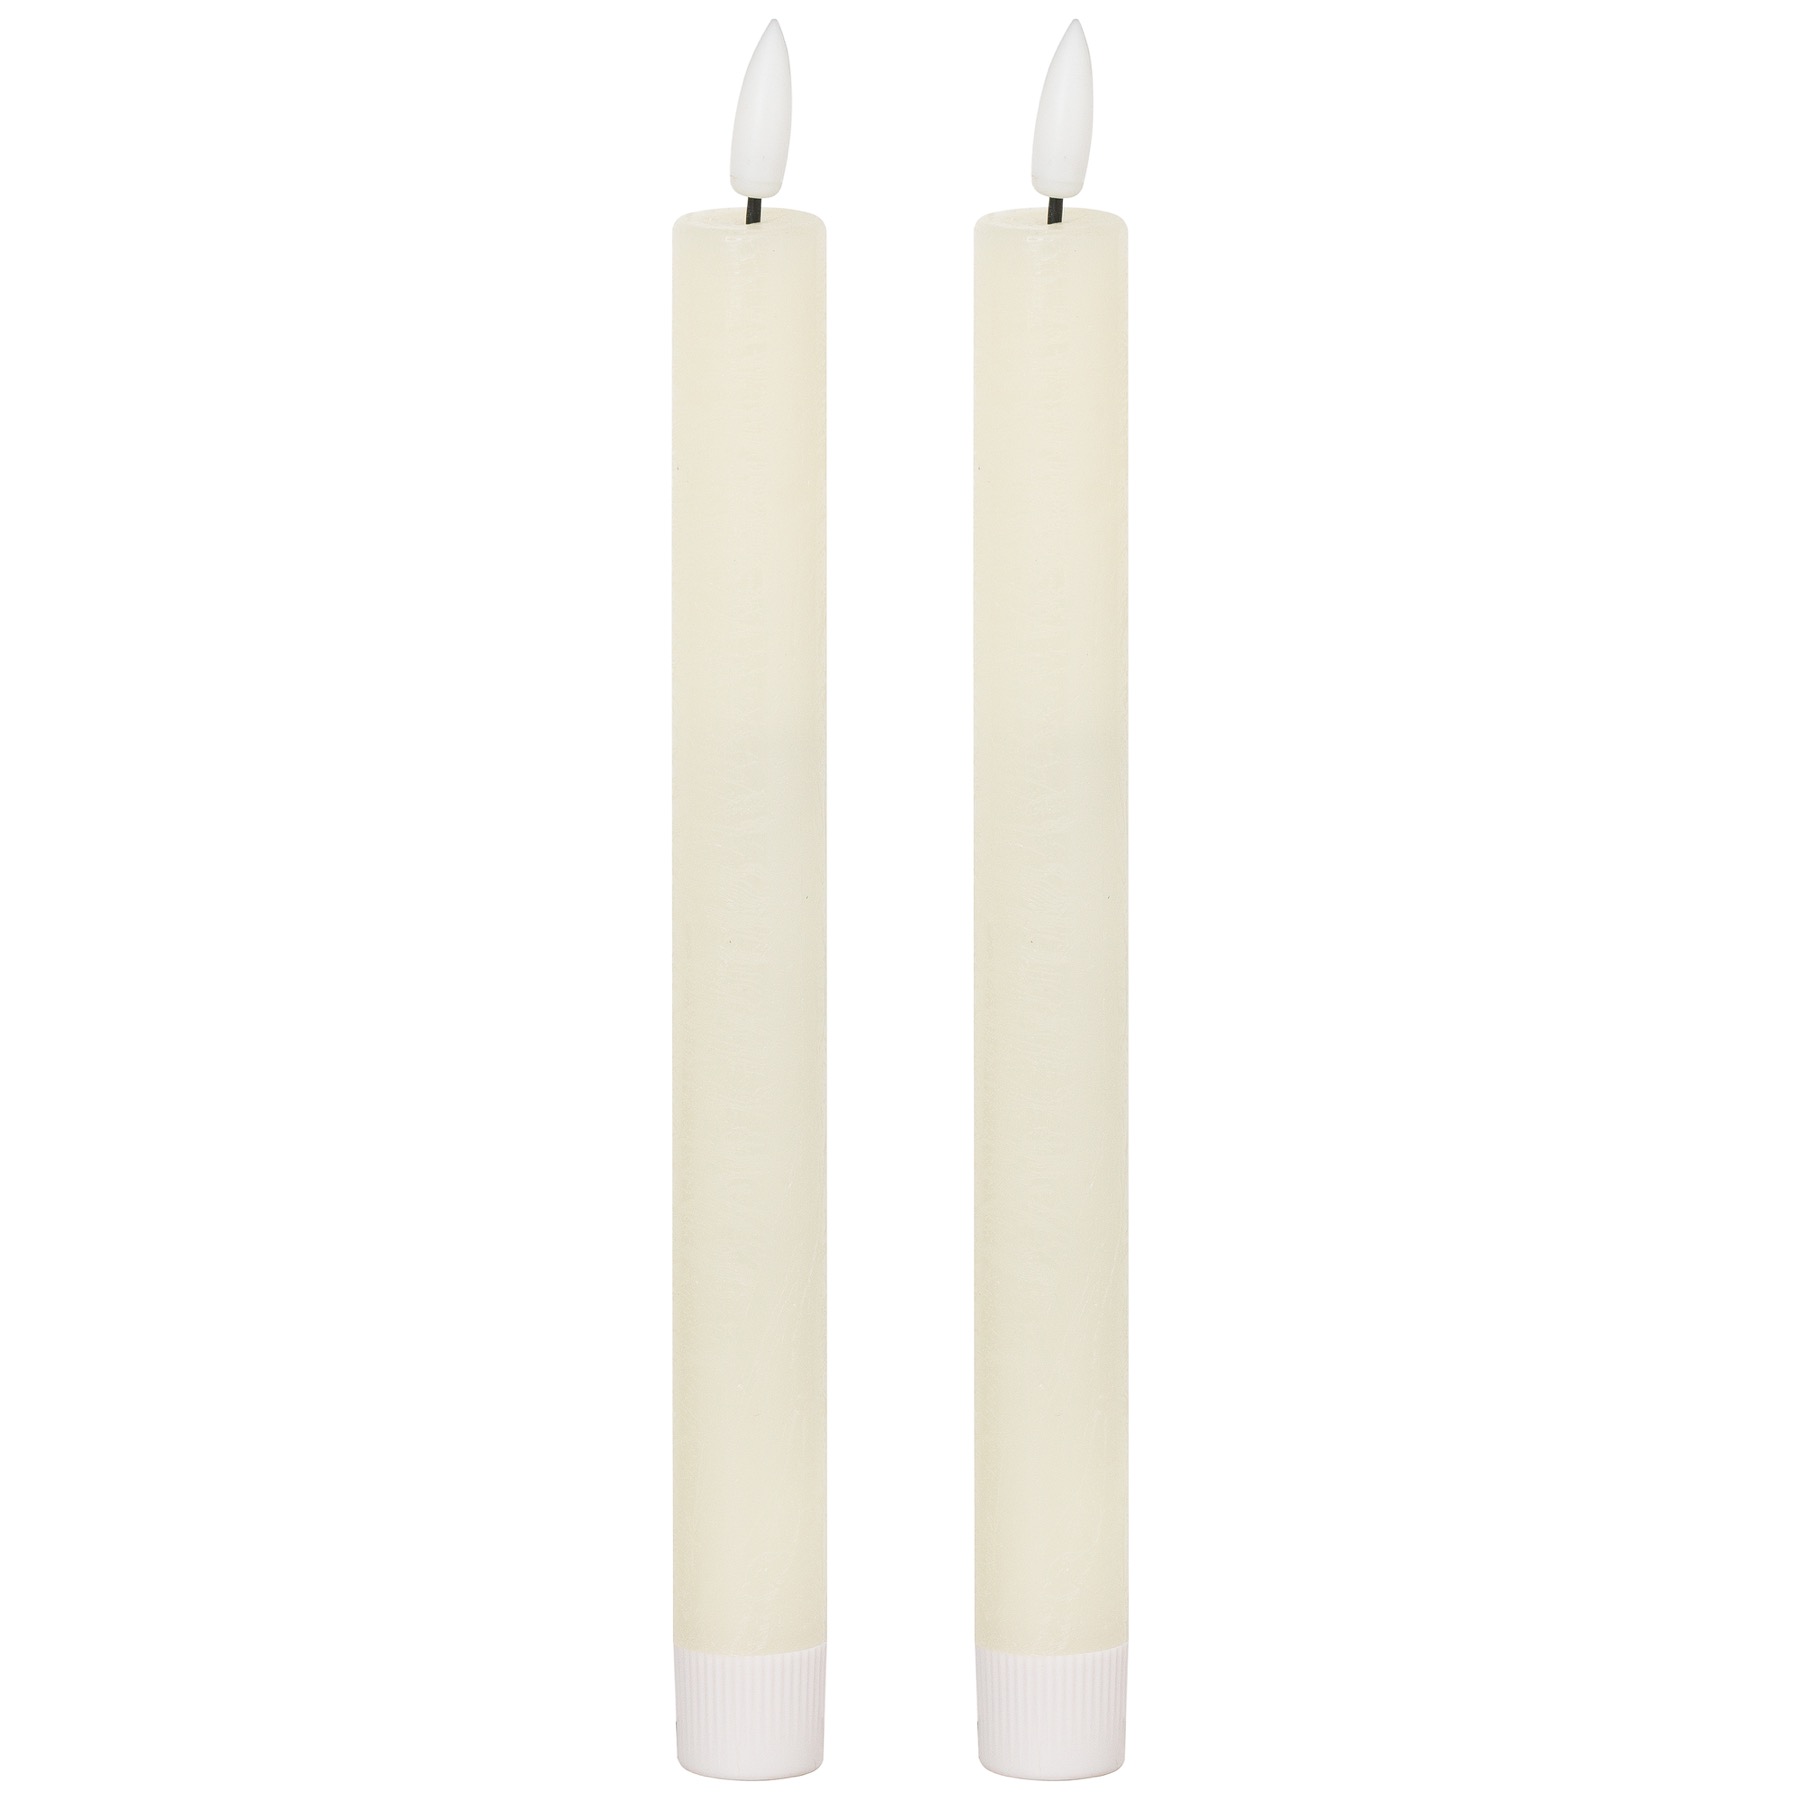 Luxe Collection Natural Glow S/ 2 Ivory LED Dinner Candles - Image 1